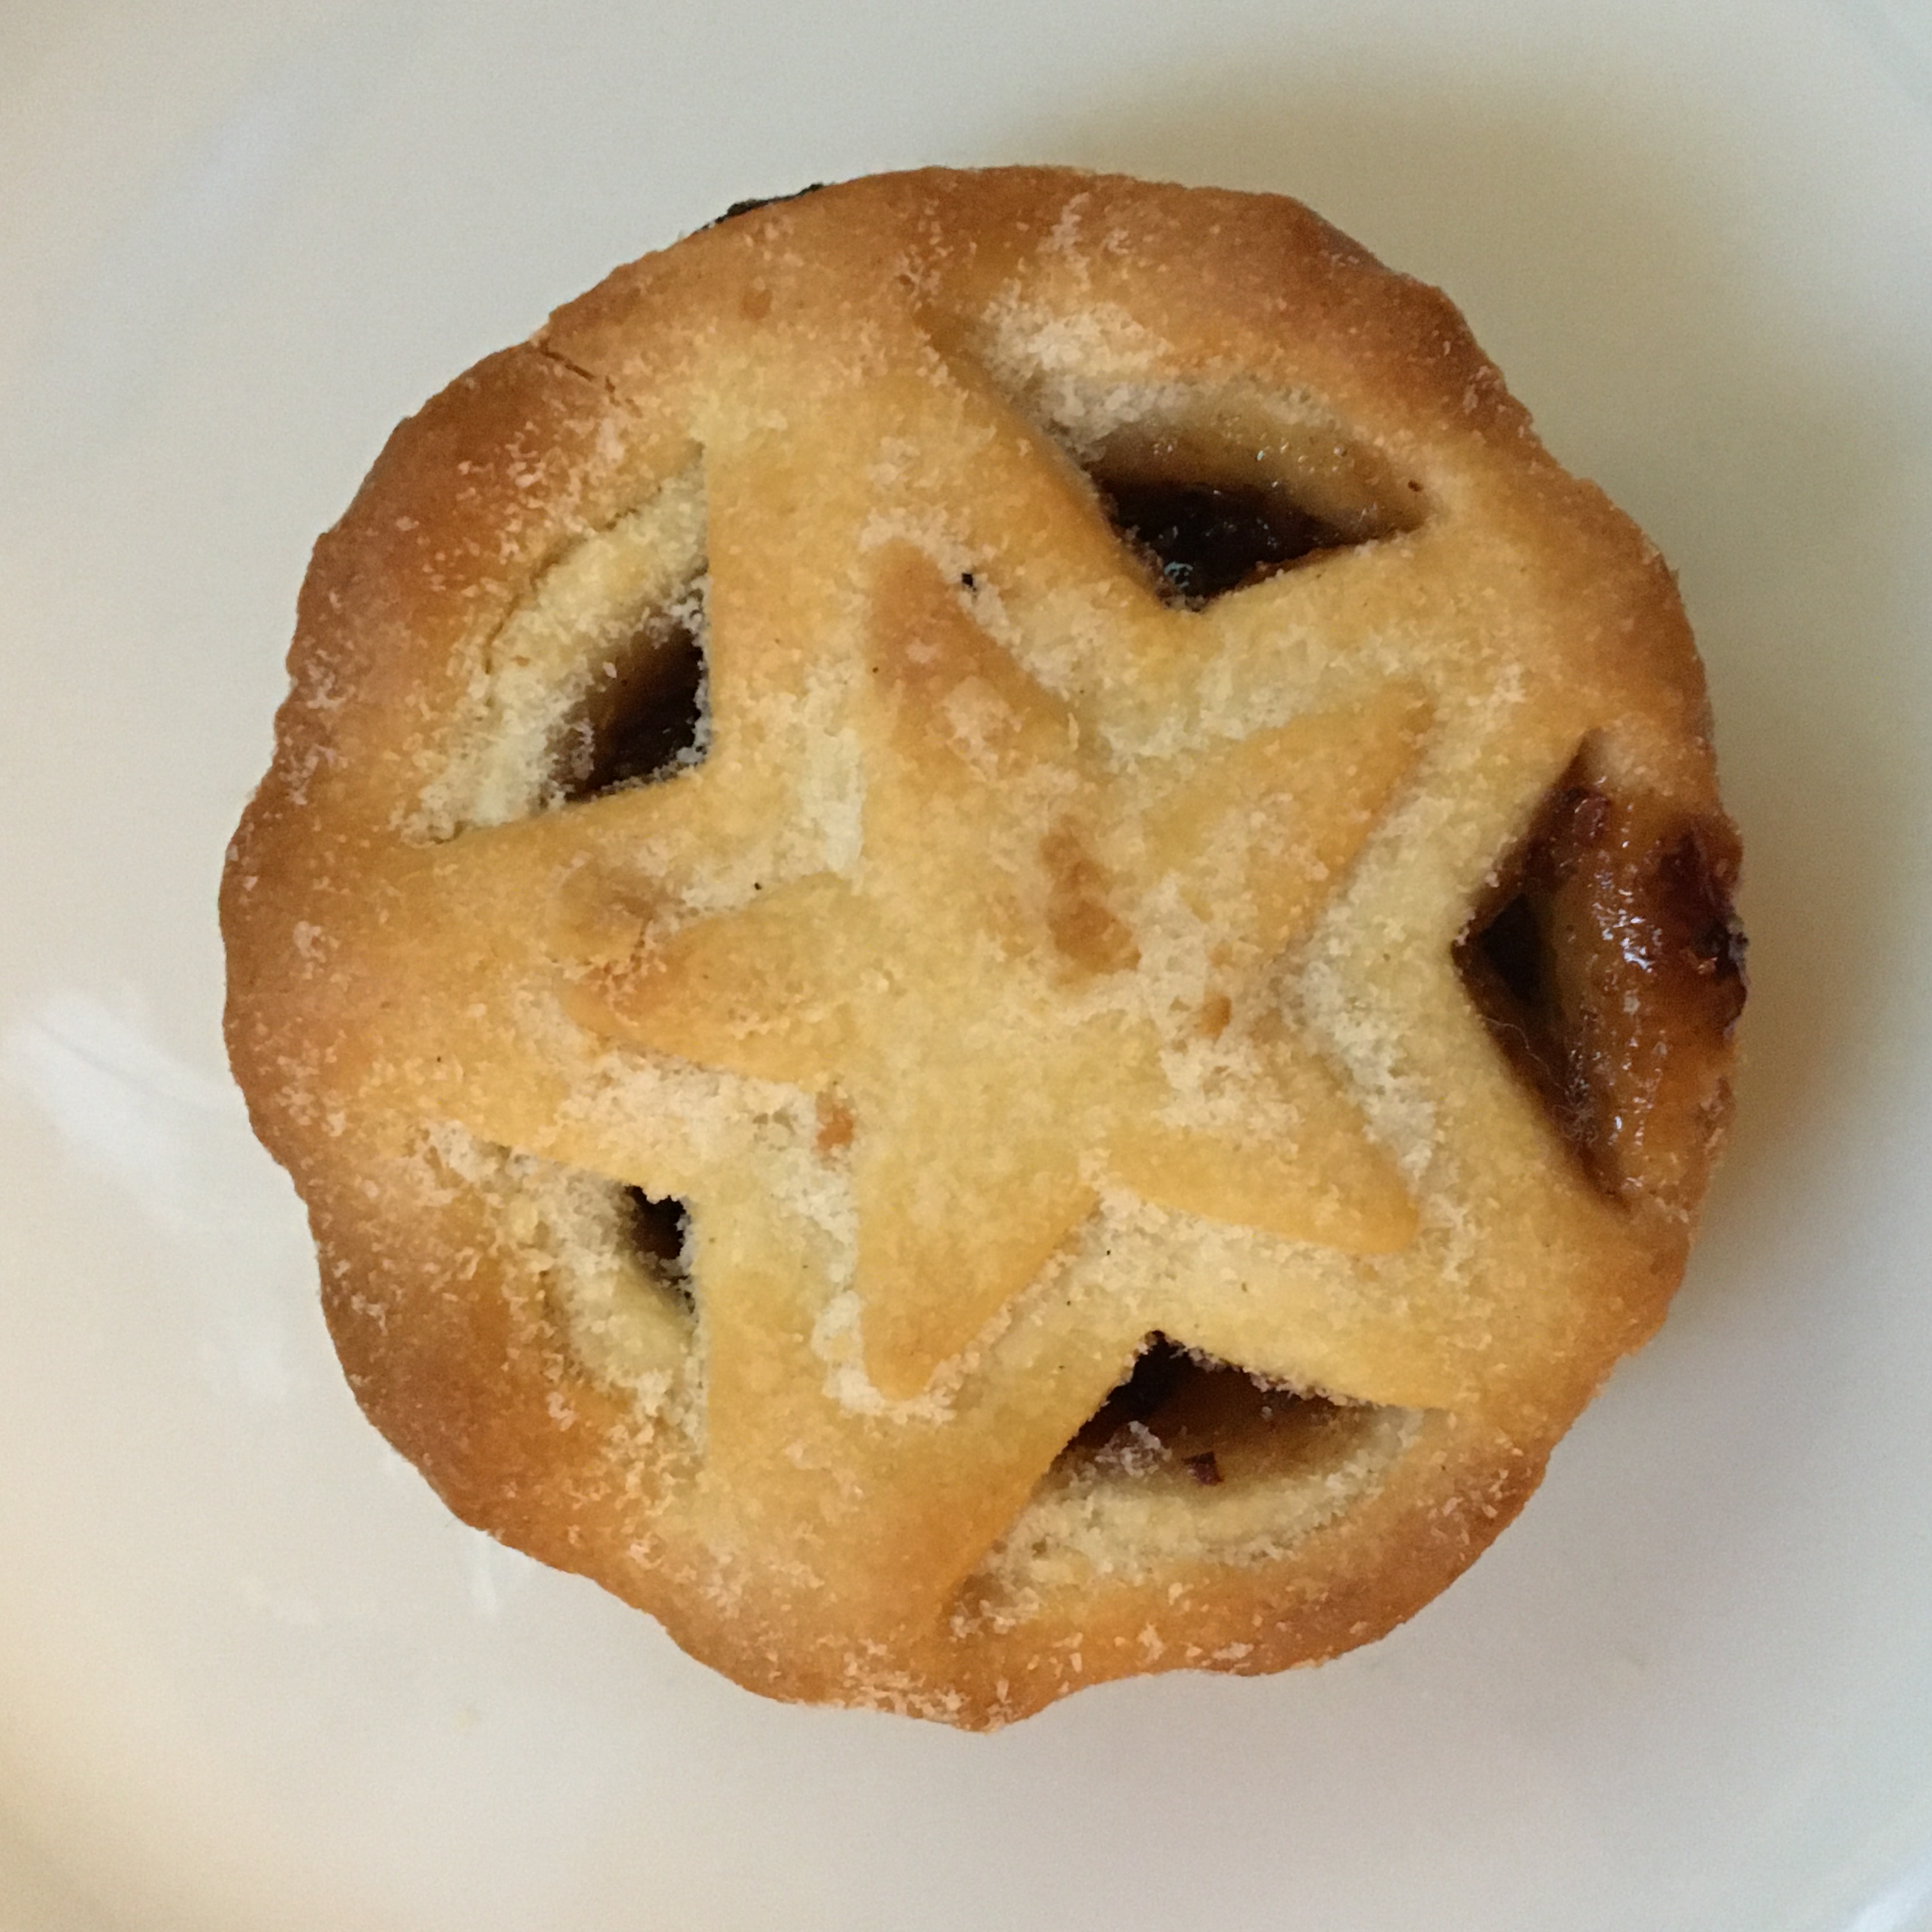 Higher, Further, Mince-ier: More Marvel Characters as Mince Pies